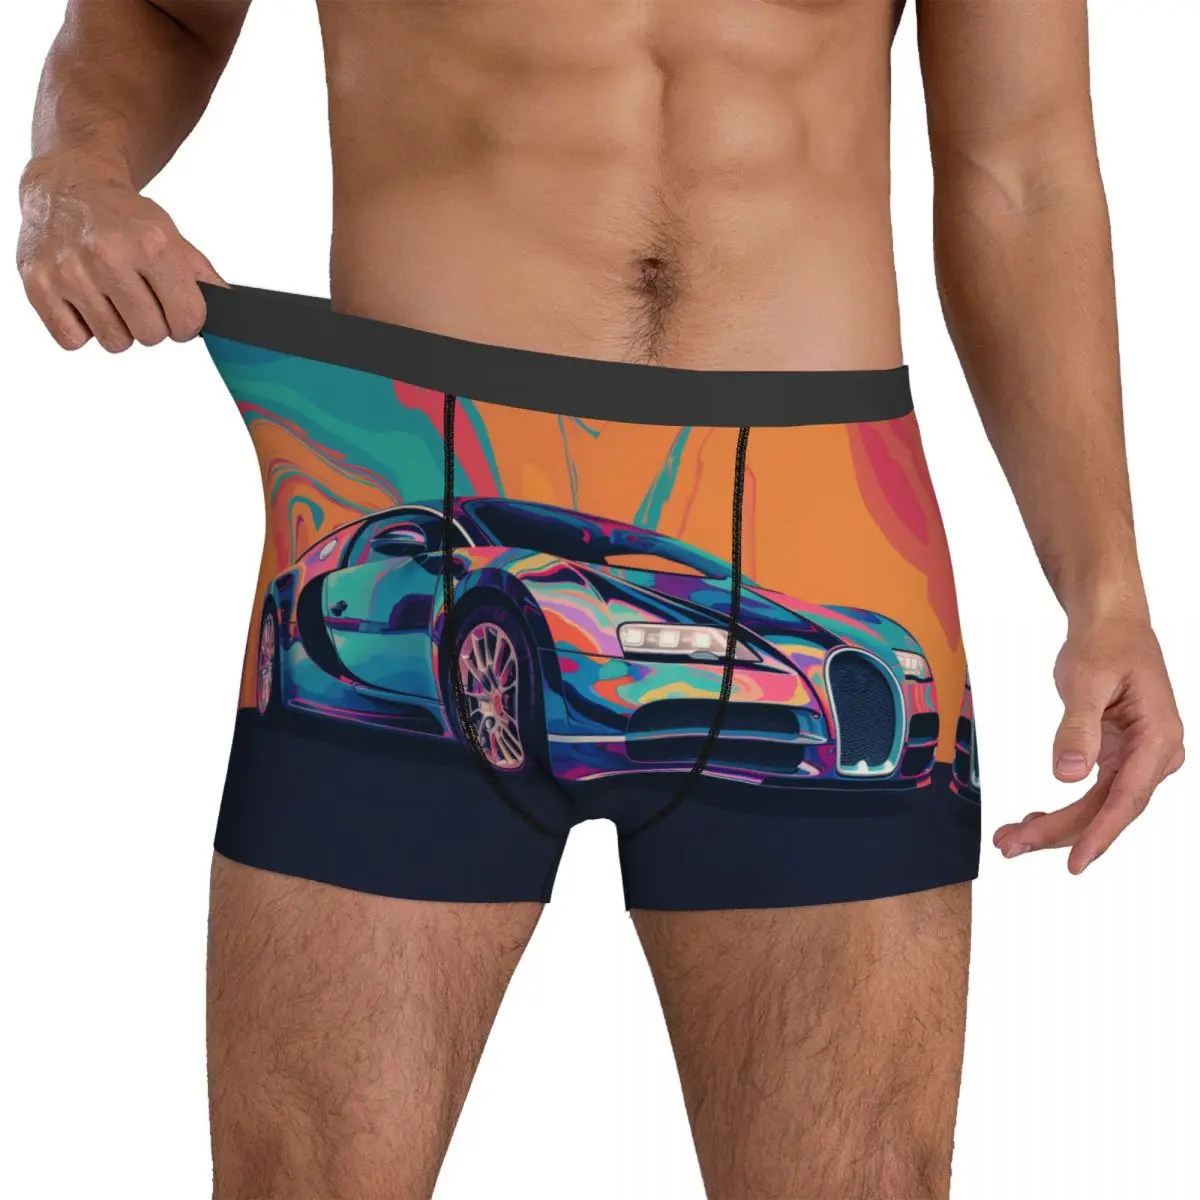 

Super Sports Car Underwear Neo Fauvism Cover Art Printing Boxershorts Trenky Man Underpants Sexy Shorts Briefs Gift Idea